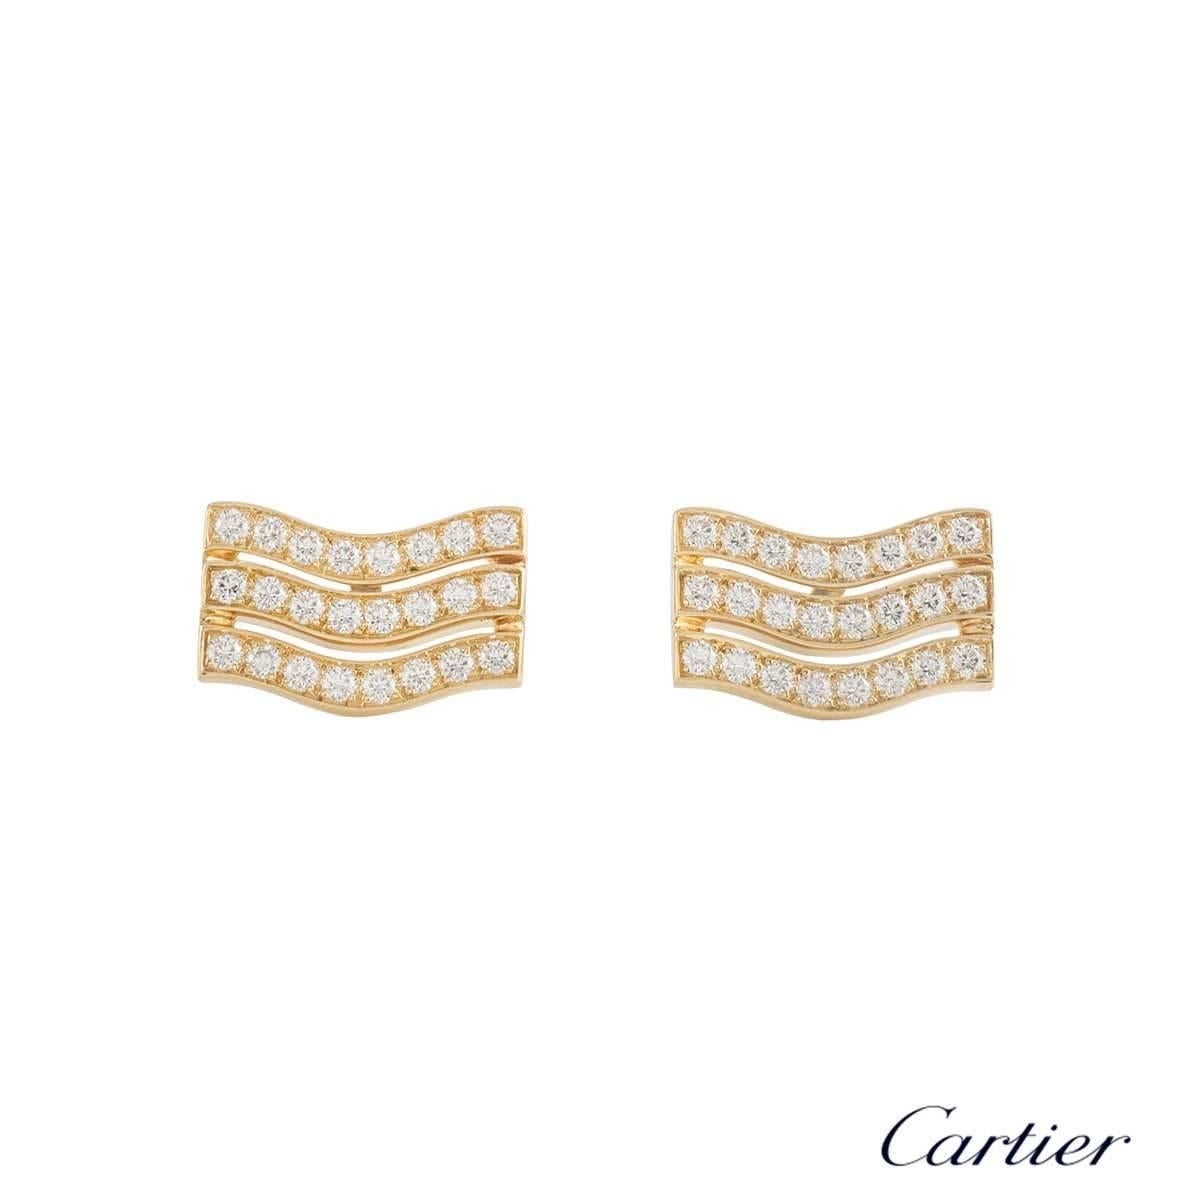 A pair of 18k yellow gold diamond Cartier cufflinks. The cufflinks each comprise of 3 rows in a wave motif with round brilliant cut diamonds in each. There are 48 diamonds with a total weight of approximately 1.44ct, G+ colour and VS+ clarity. The